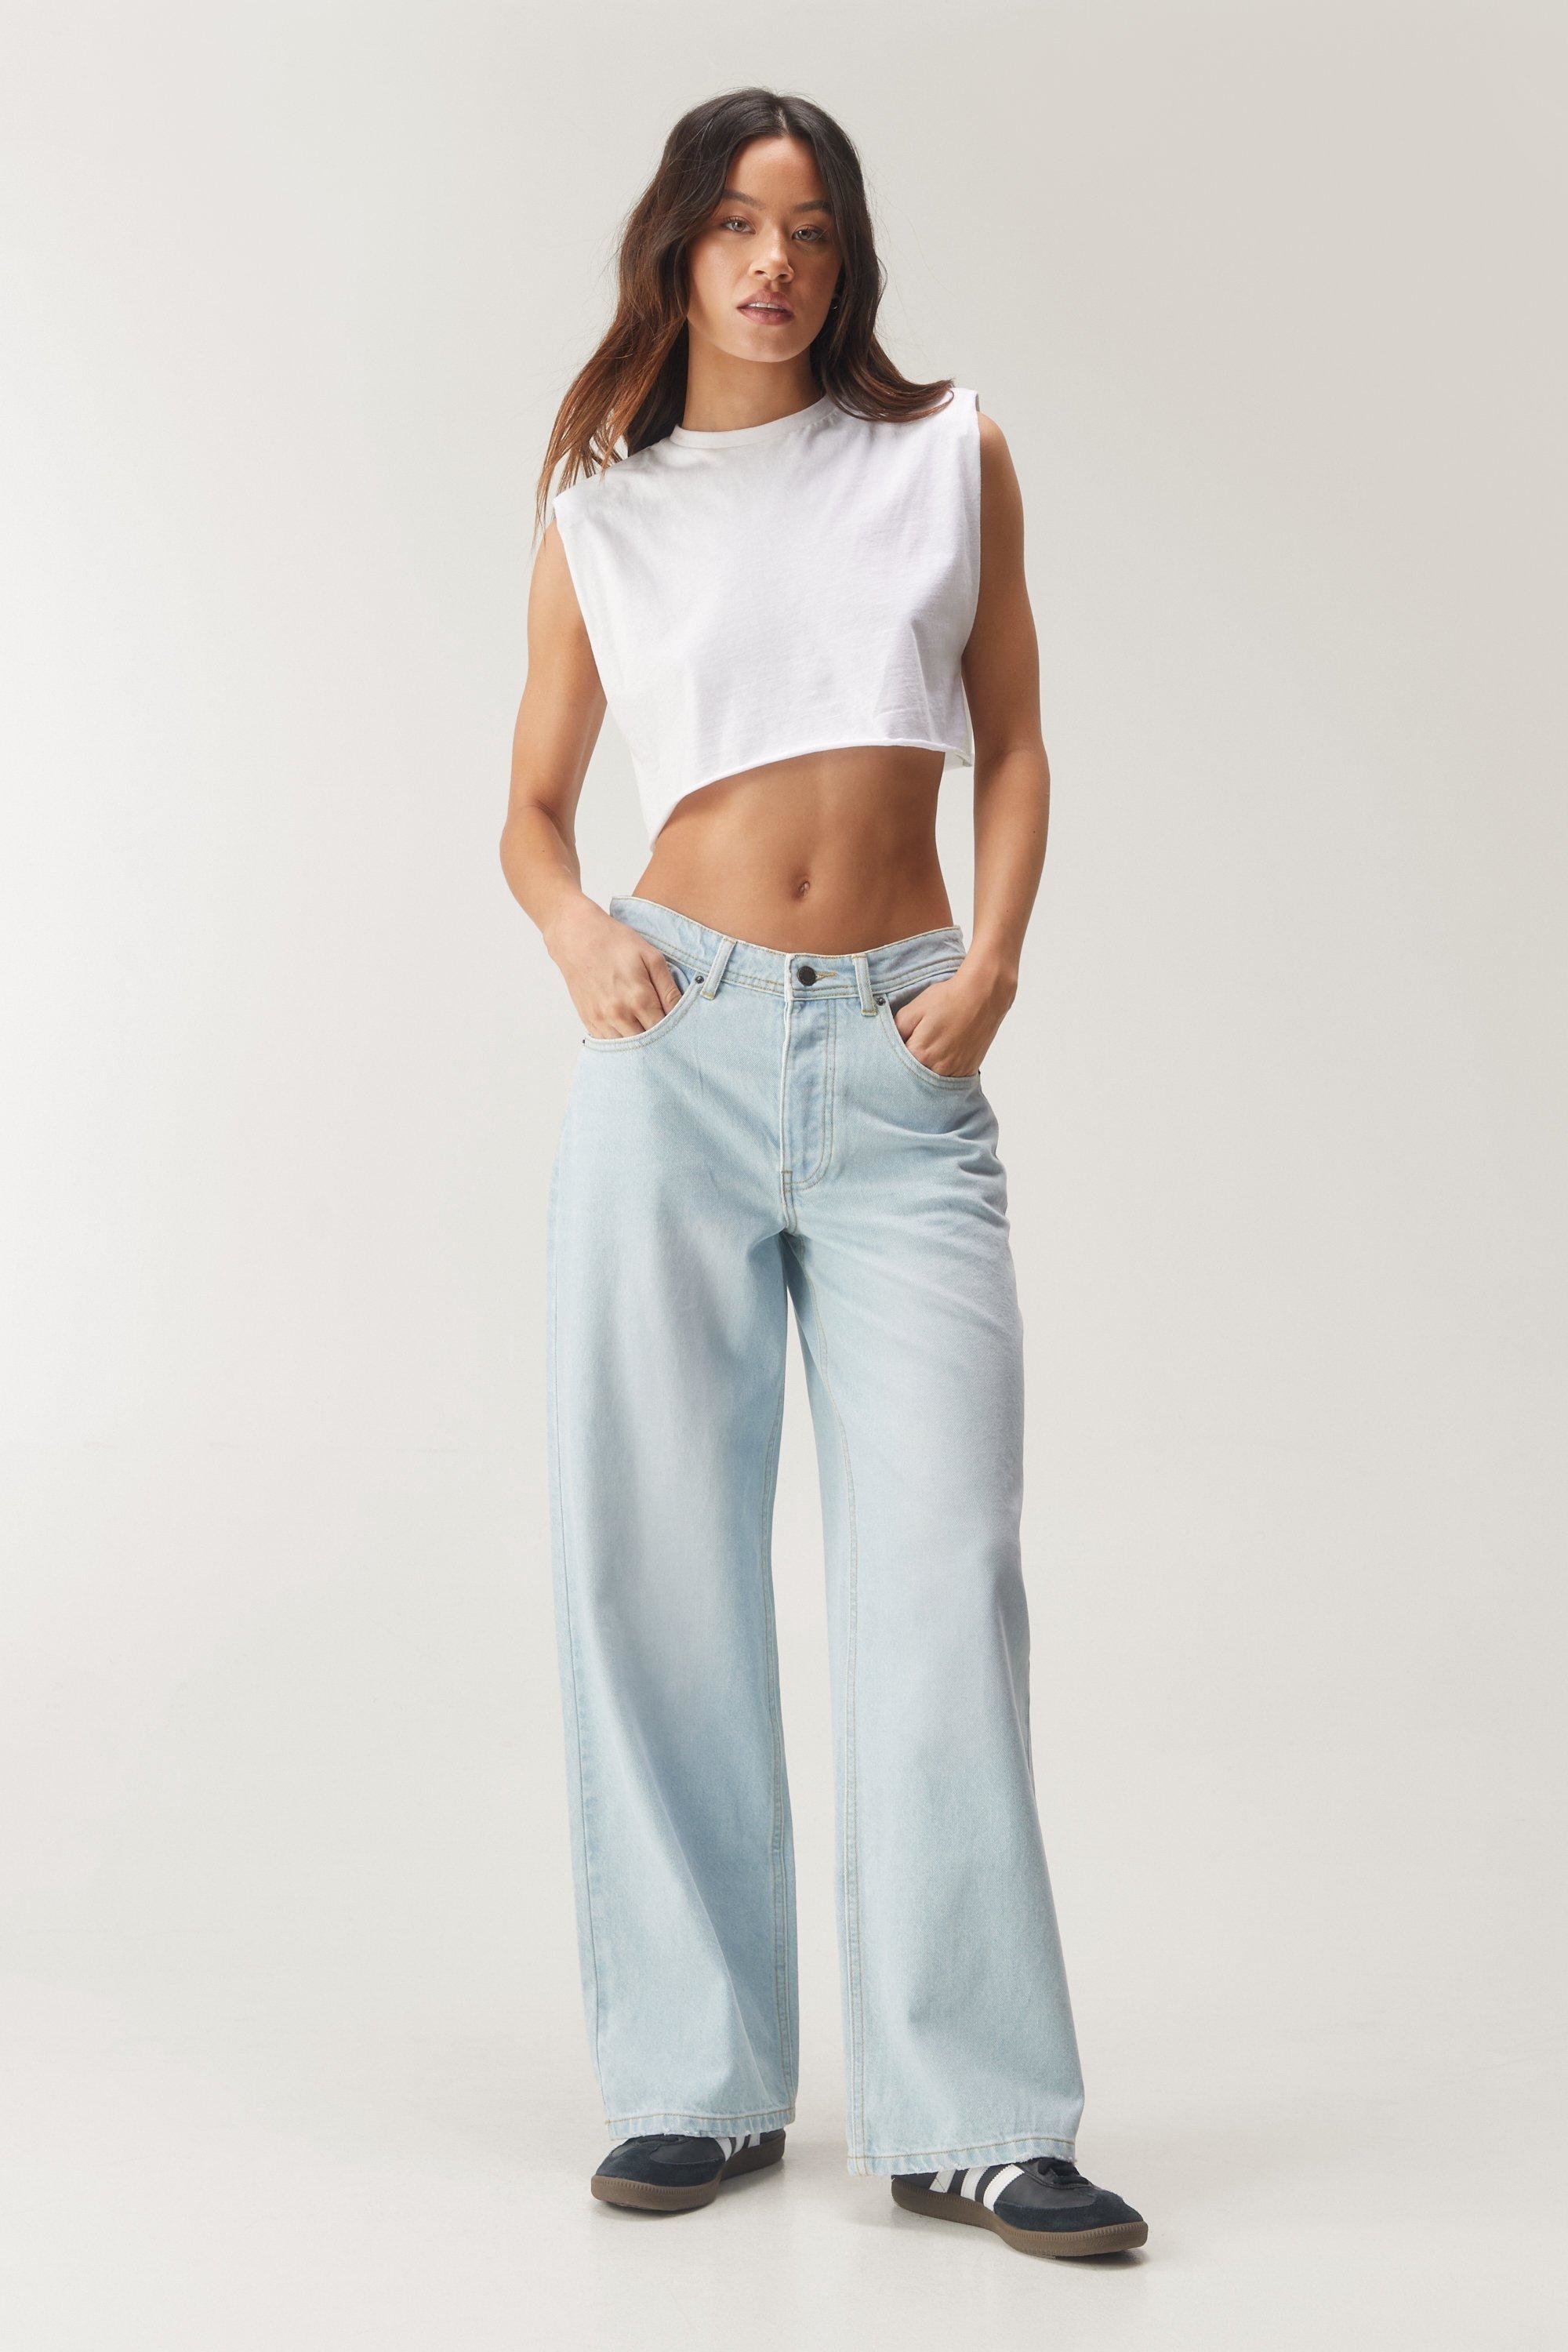 Model wearing a cropped white top and wide-leg blue jeans